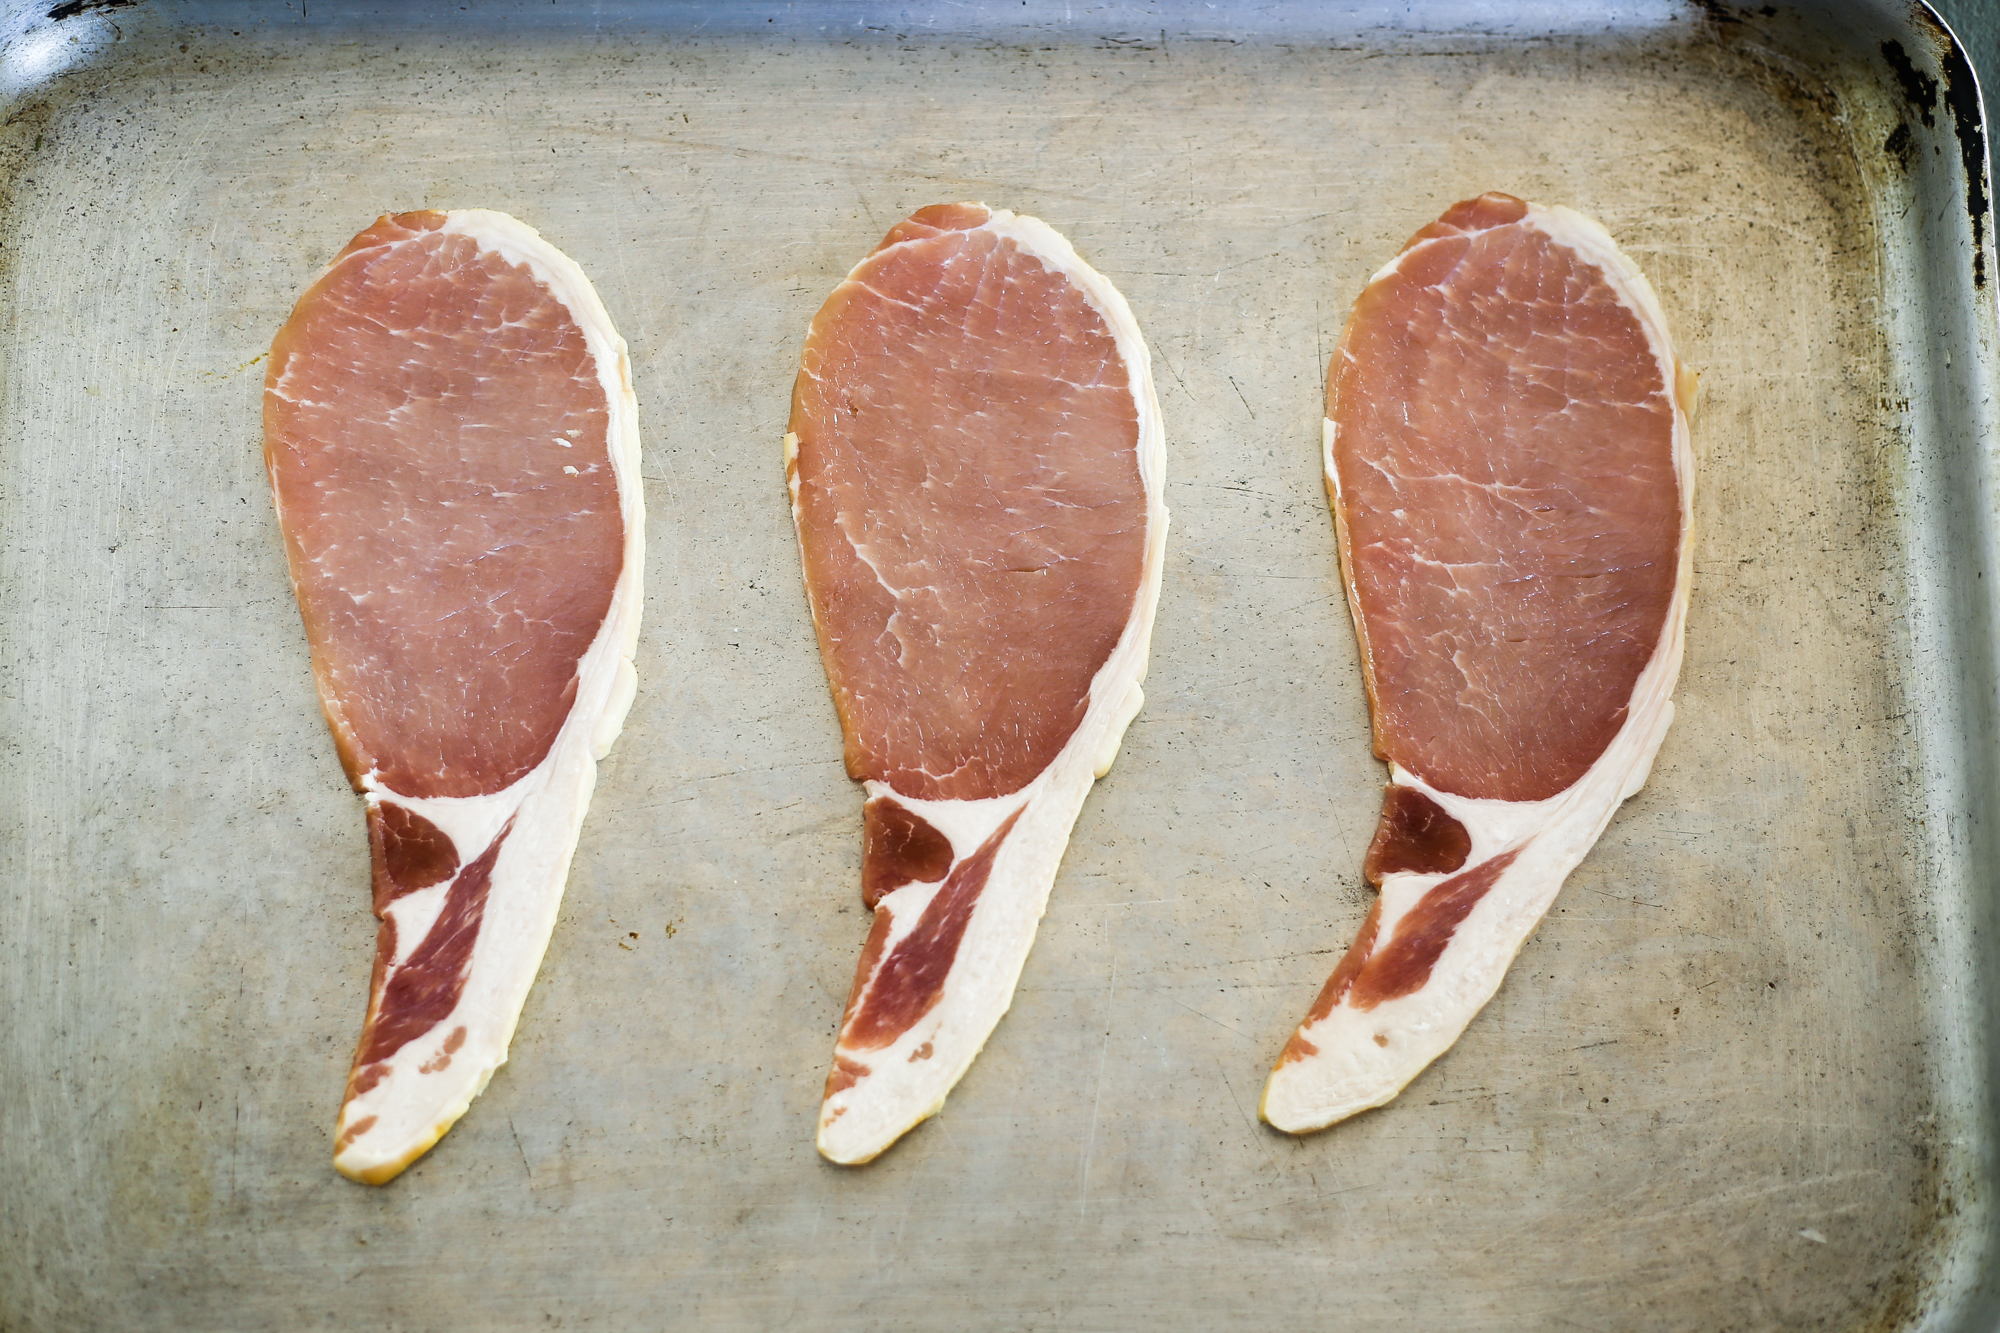 Smoked back bacon slices